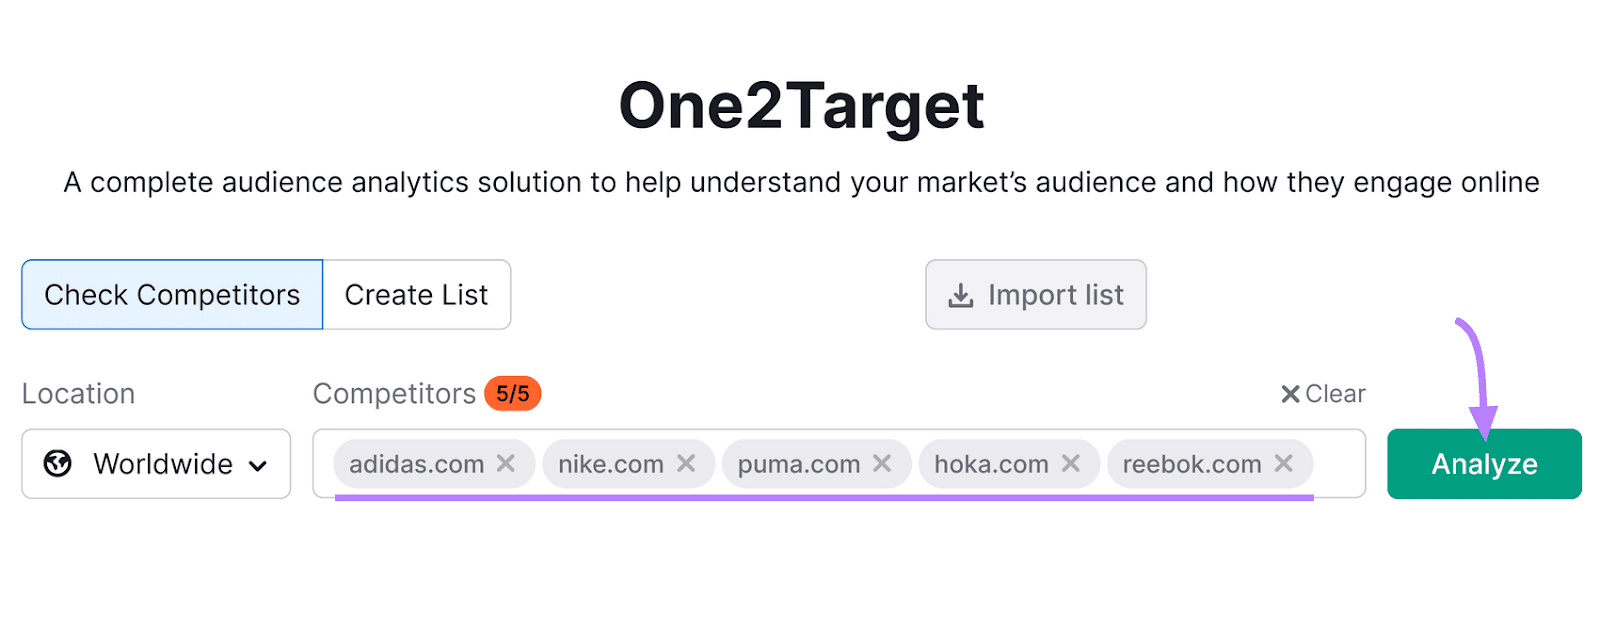 nike.com and four competitors' domains entered into the One2Target tool